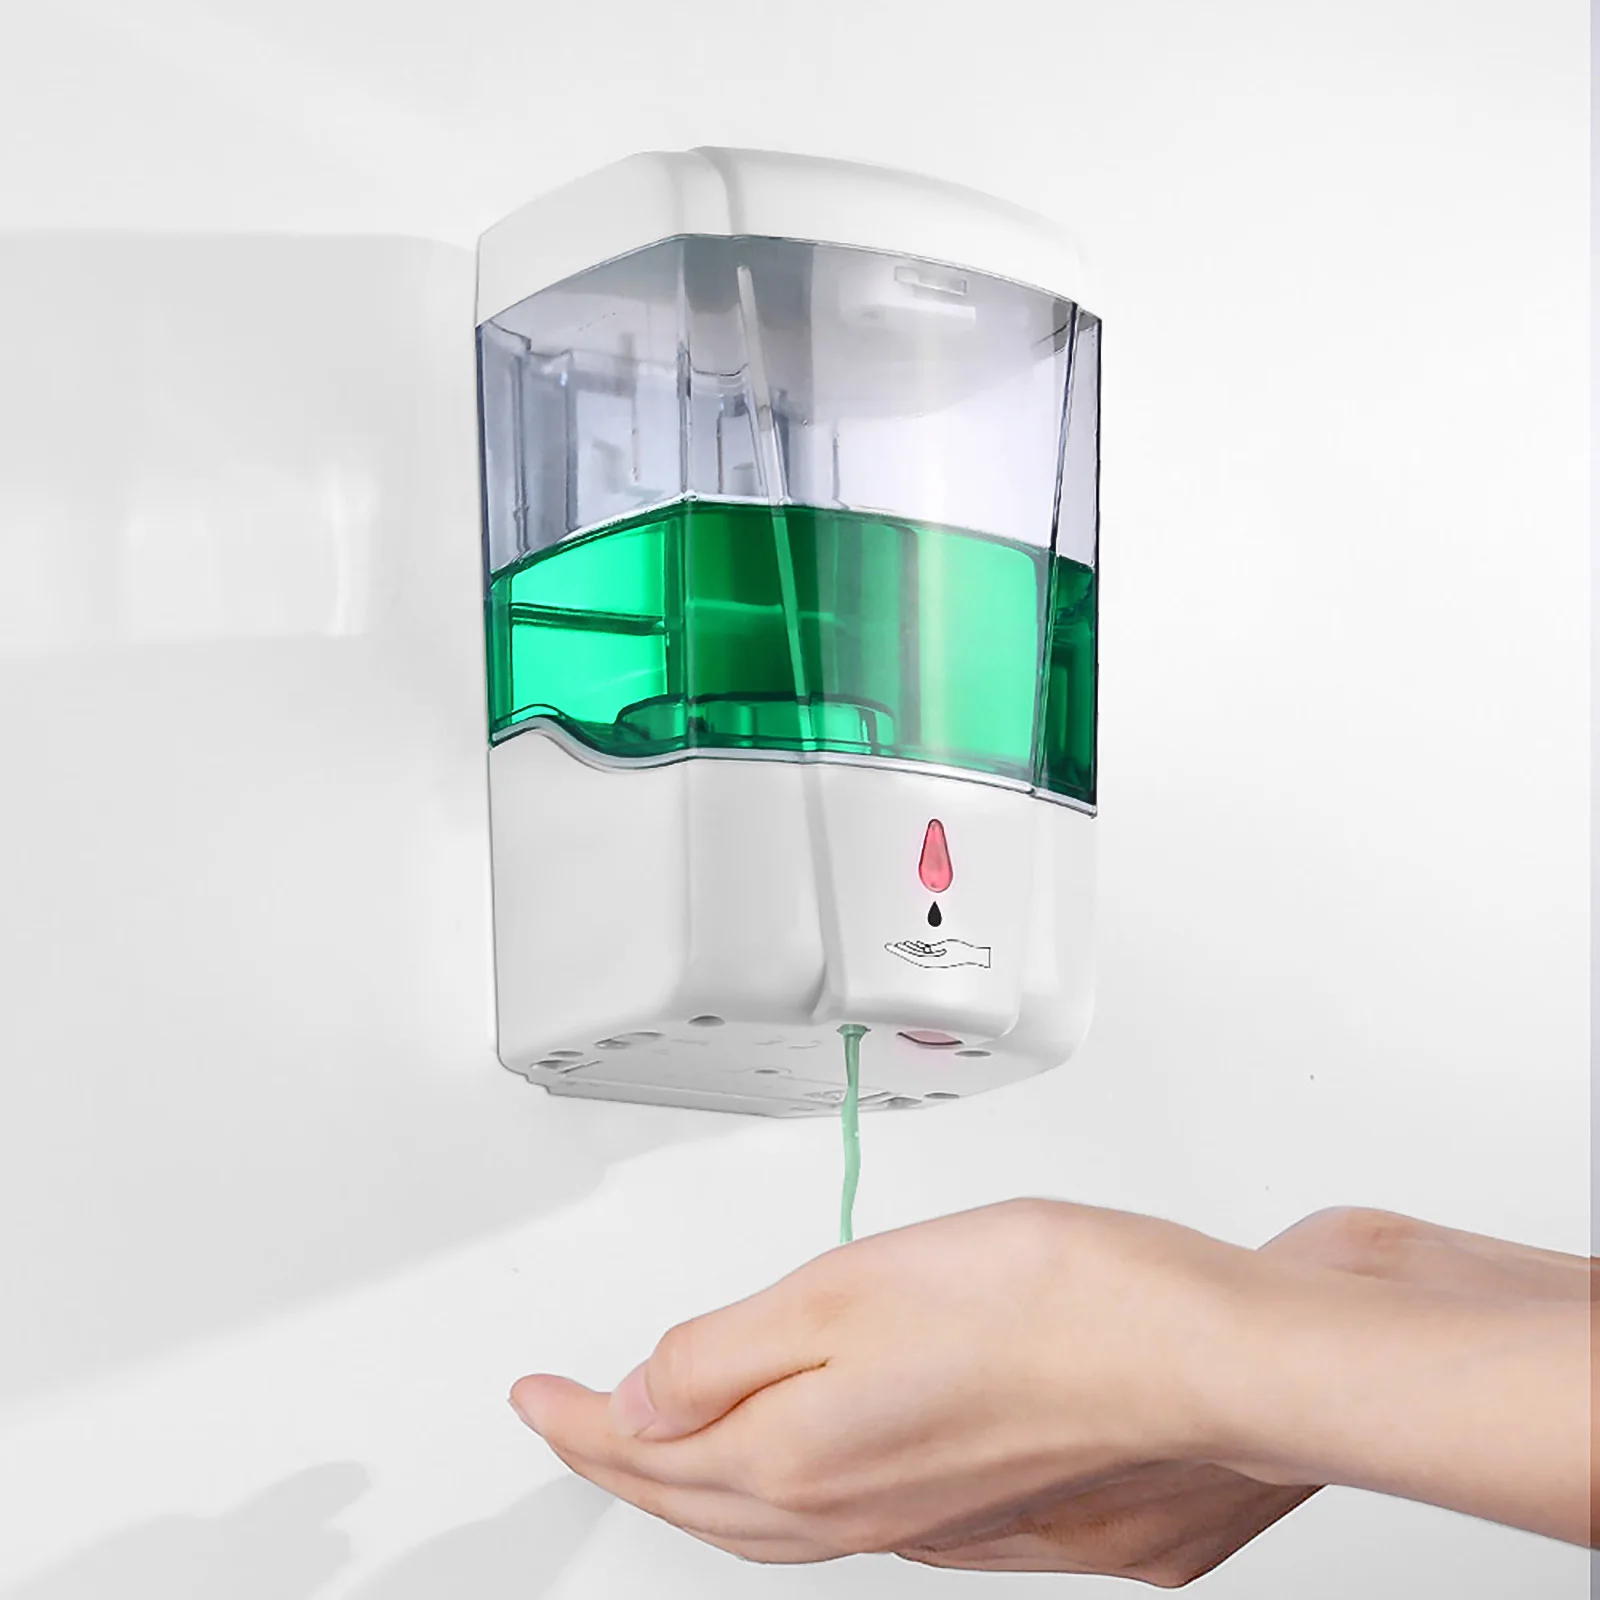 

700ml Automatic Foam Soap Dispenser Smart Wall-Mounted Hand Sanitizer Container Touchless IR Sensor Liquid Dispensers For Home